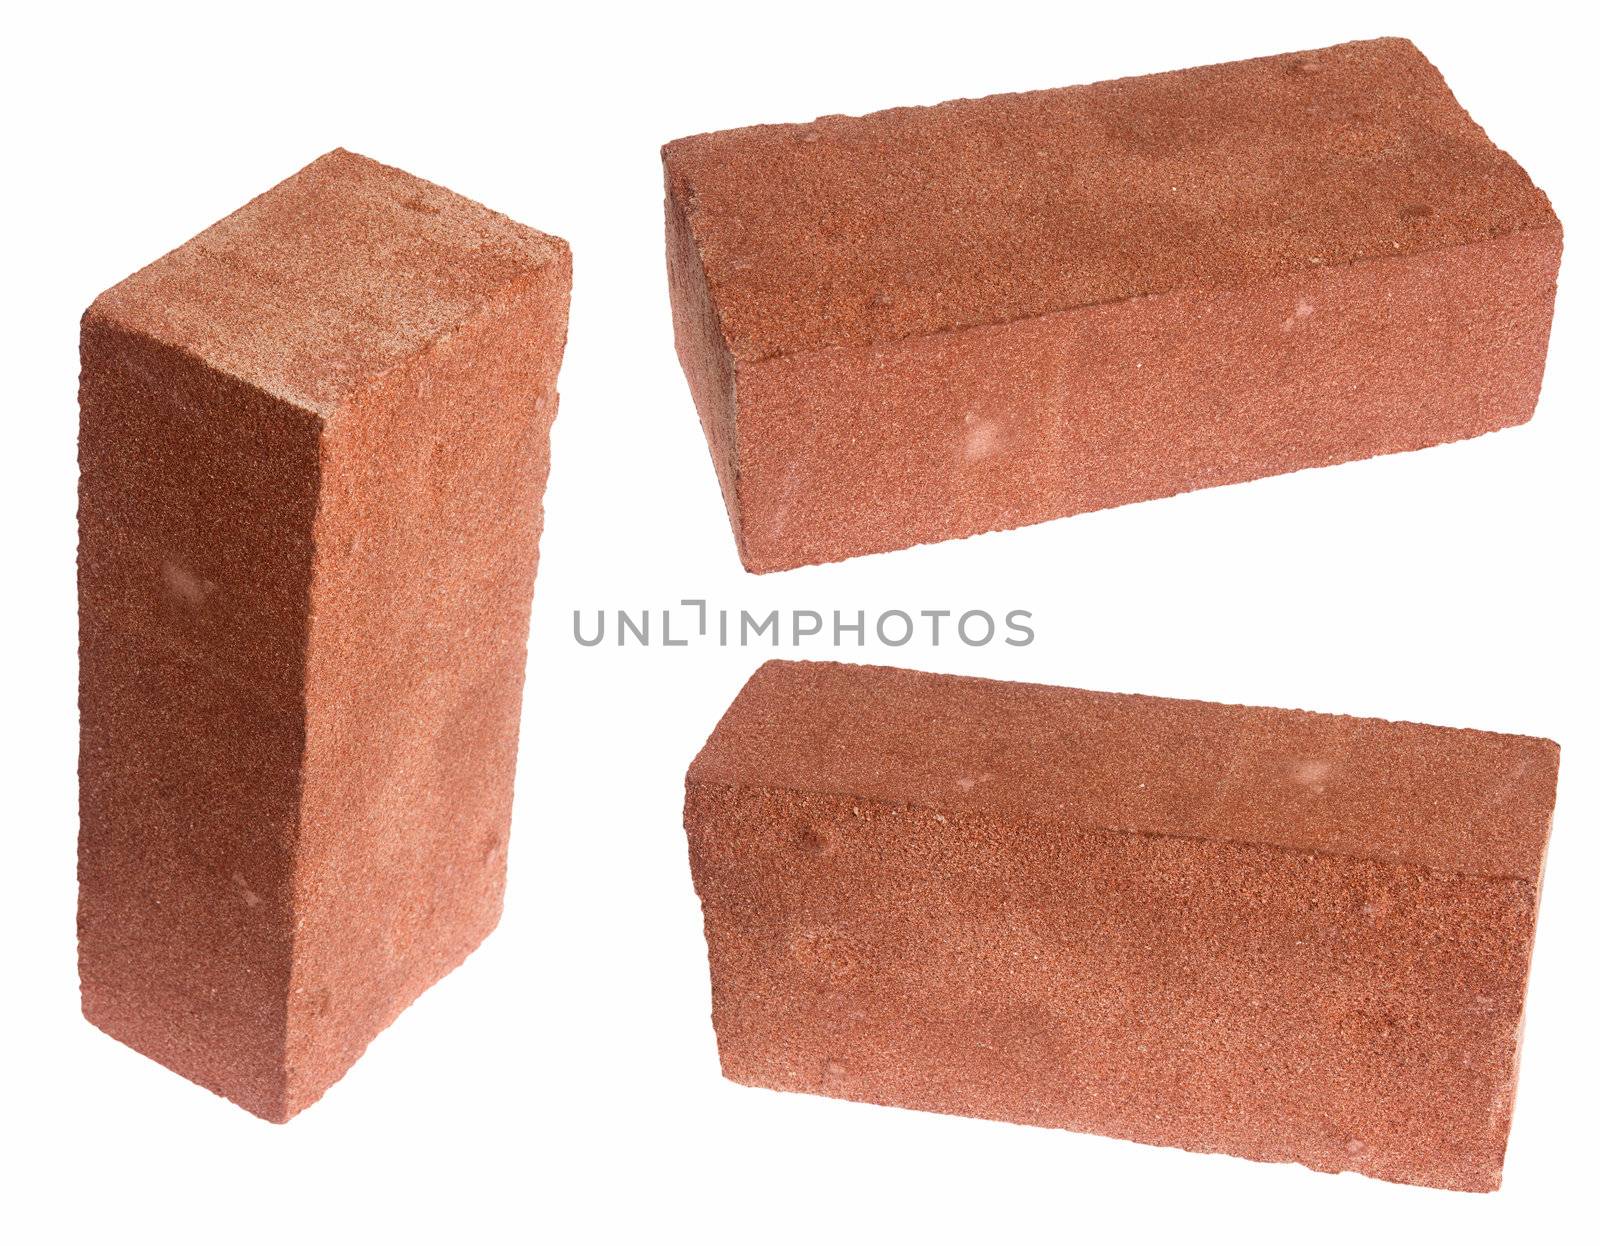 Series of bricks, isolated on background